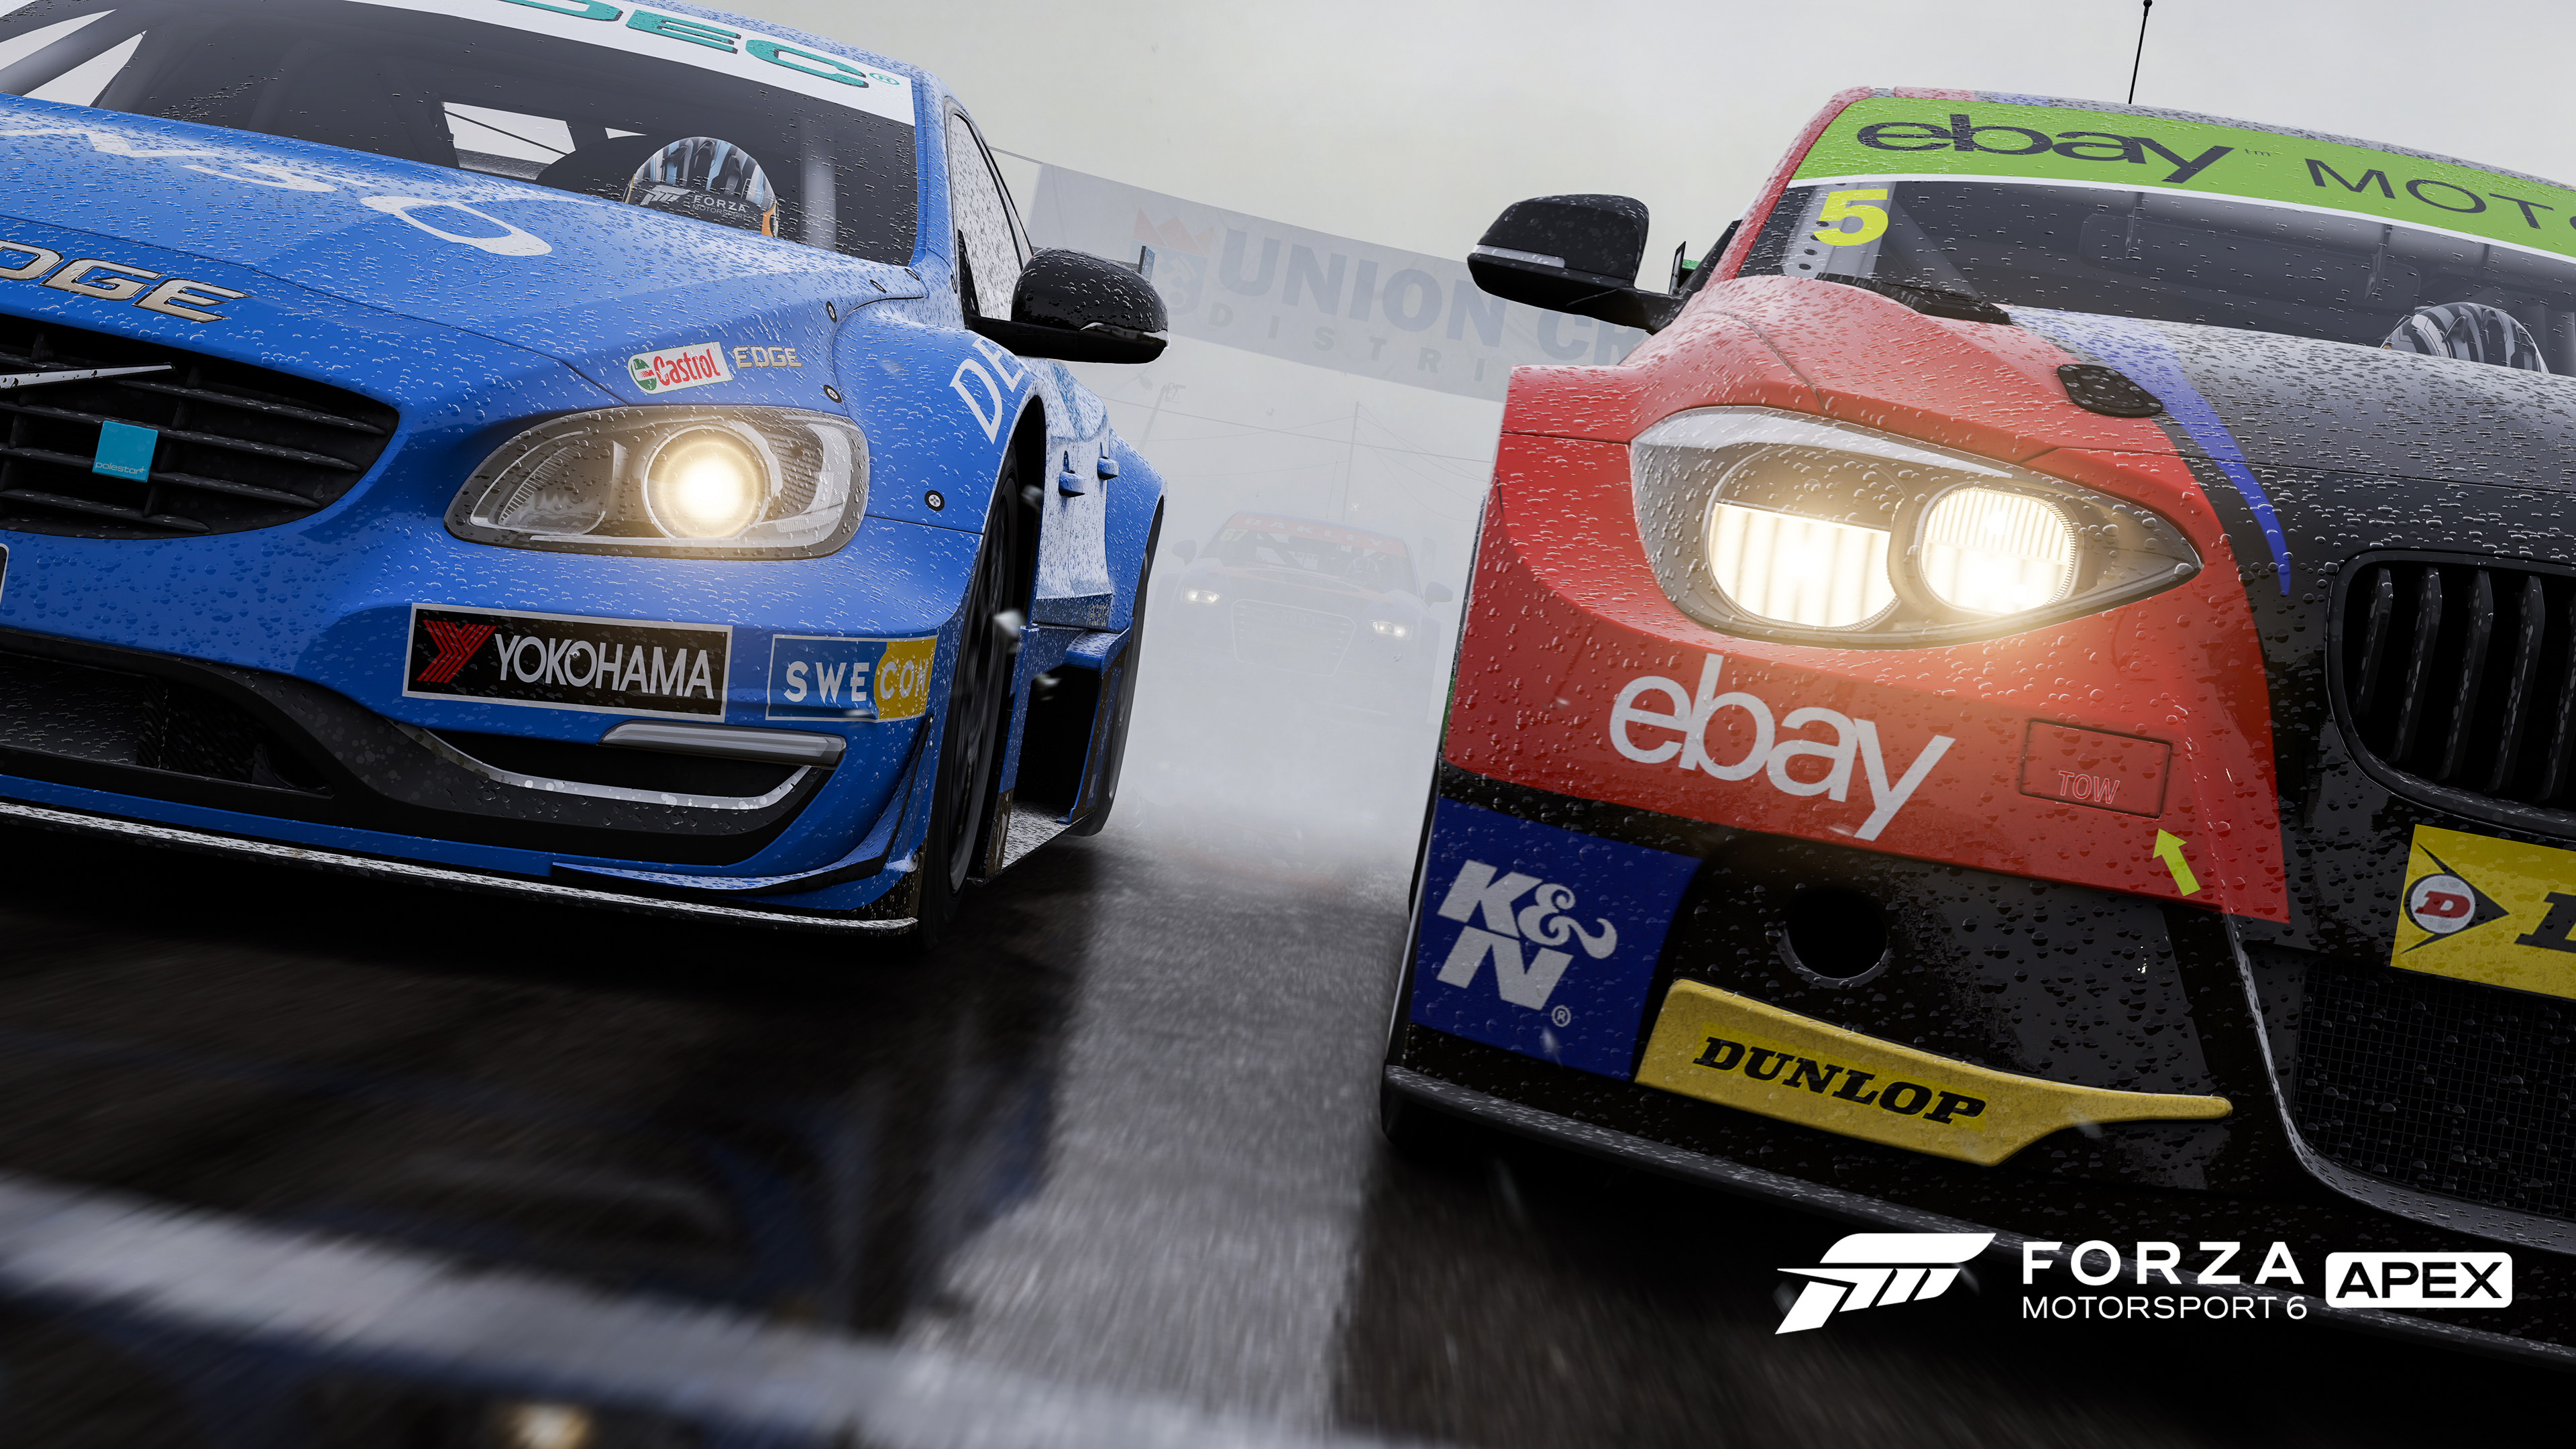 microondas flota Amplificador Forza Motorsport 6 Apex, HD Games, 4k Wallpapers, Images, Backgrounds,  Photos and Pictures